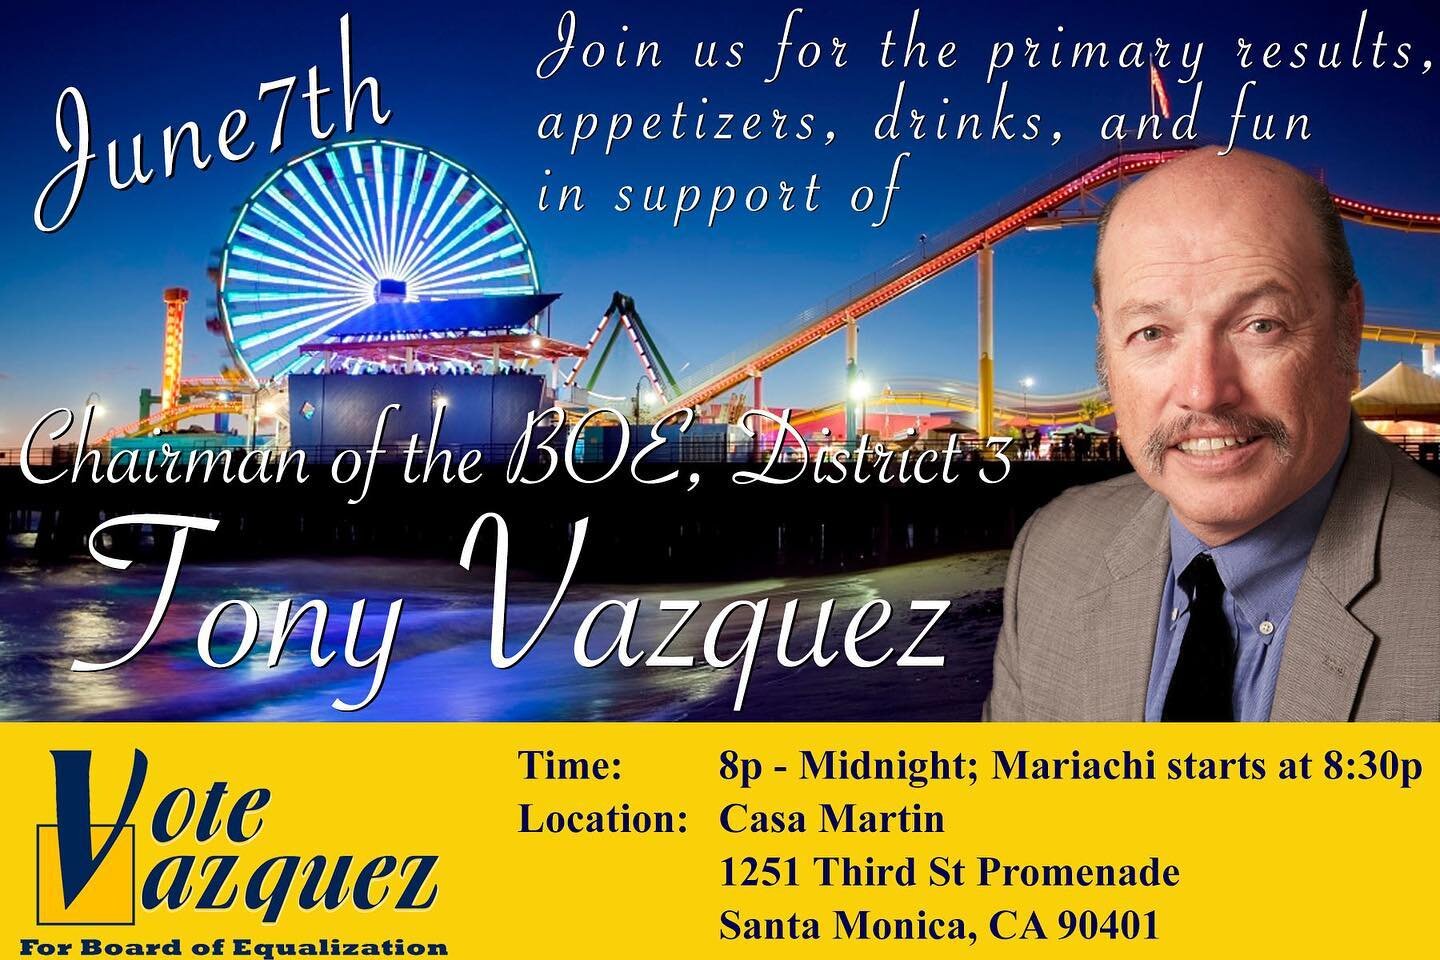 Come out and join us for primary election results this Tuesday, June 7th at Casa Martin on the Third St promenade. It will be a fun evening watching democracy in action! #primaries2022 #VoteVazquez